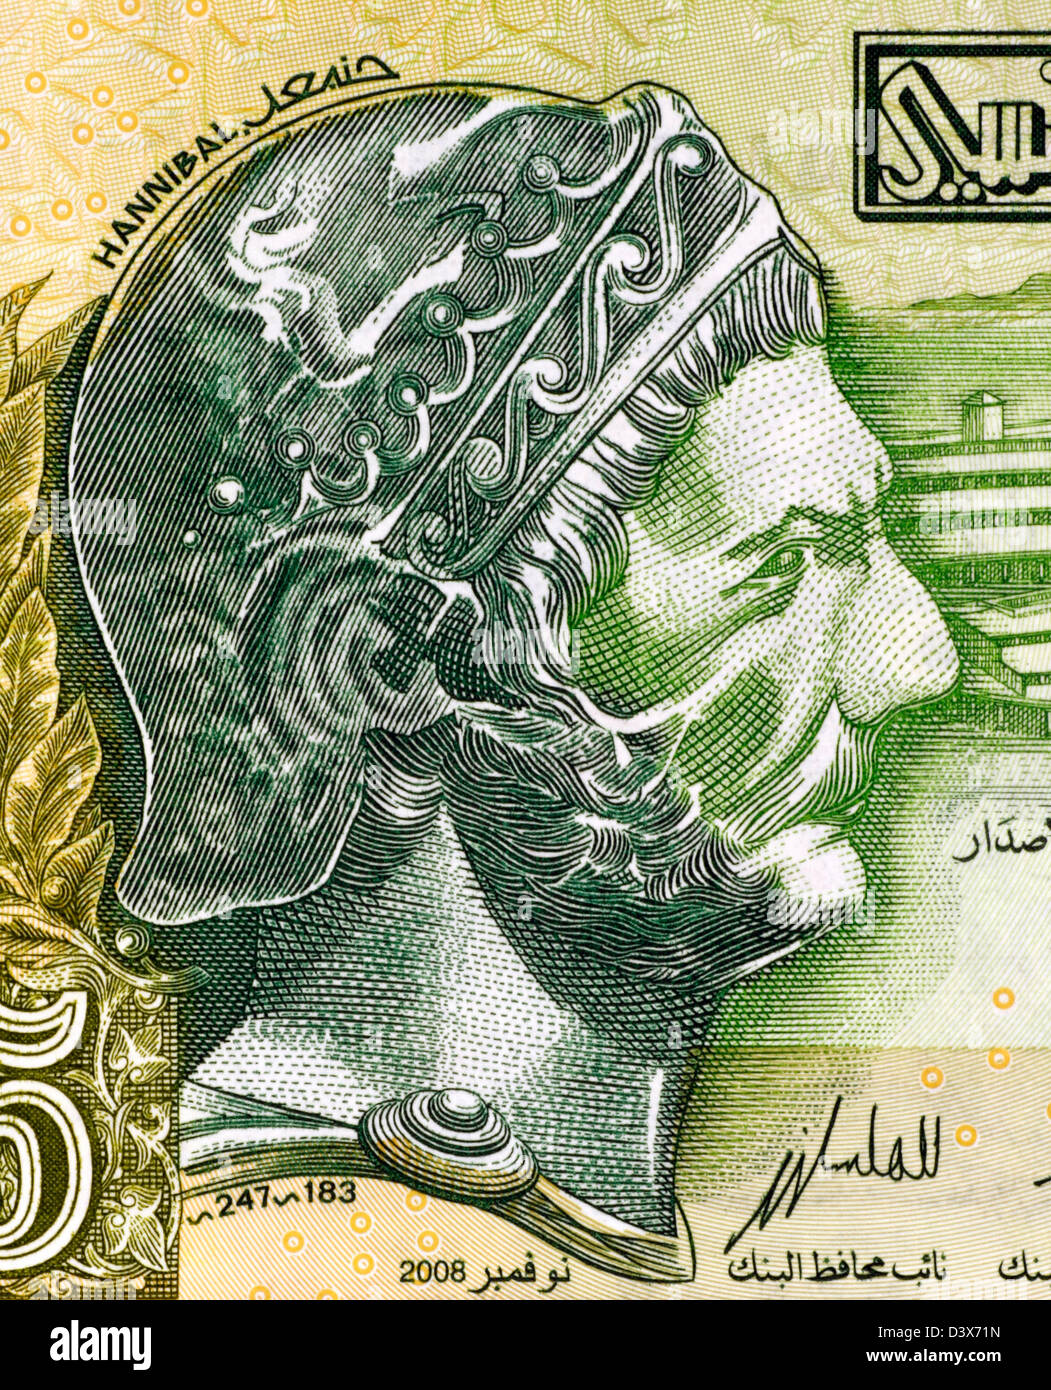 Hannibal (247-182 BC) on 5 Dinars 2008 Banknote from Tunisia. Punic Carthaginian military commander. Stock Photo